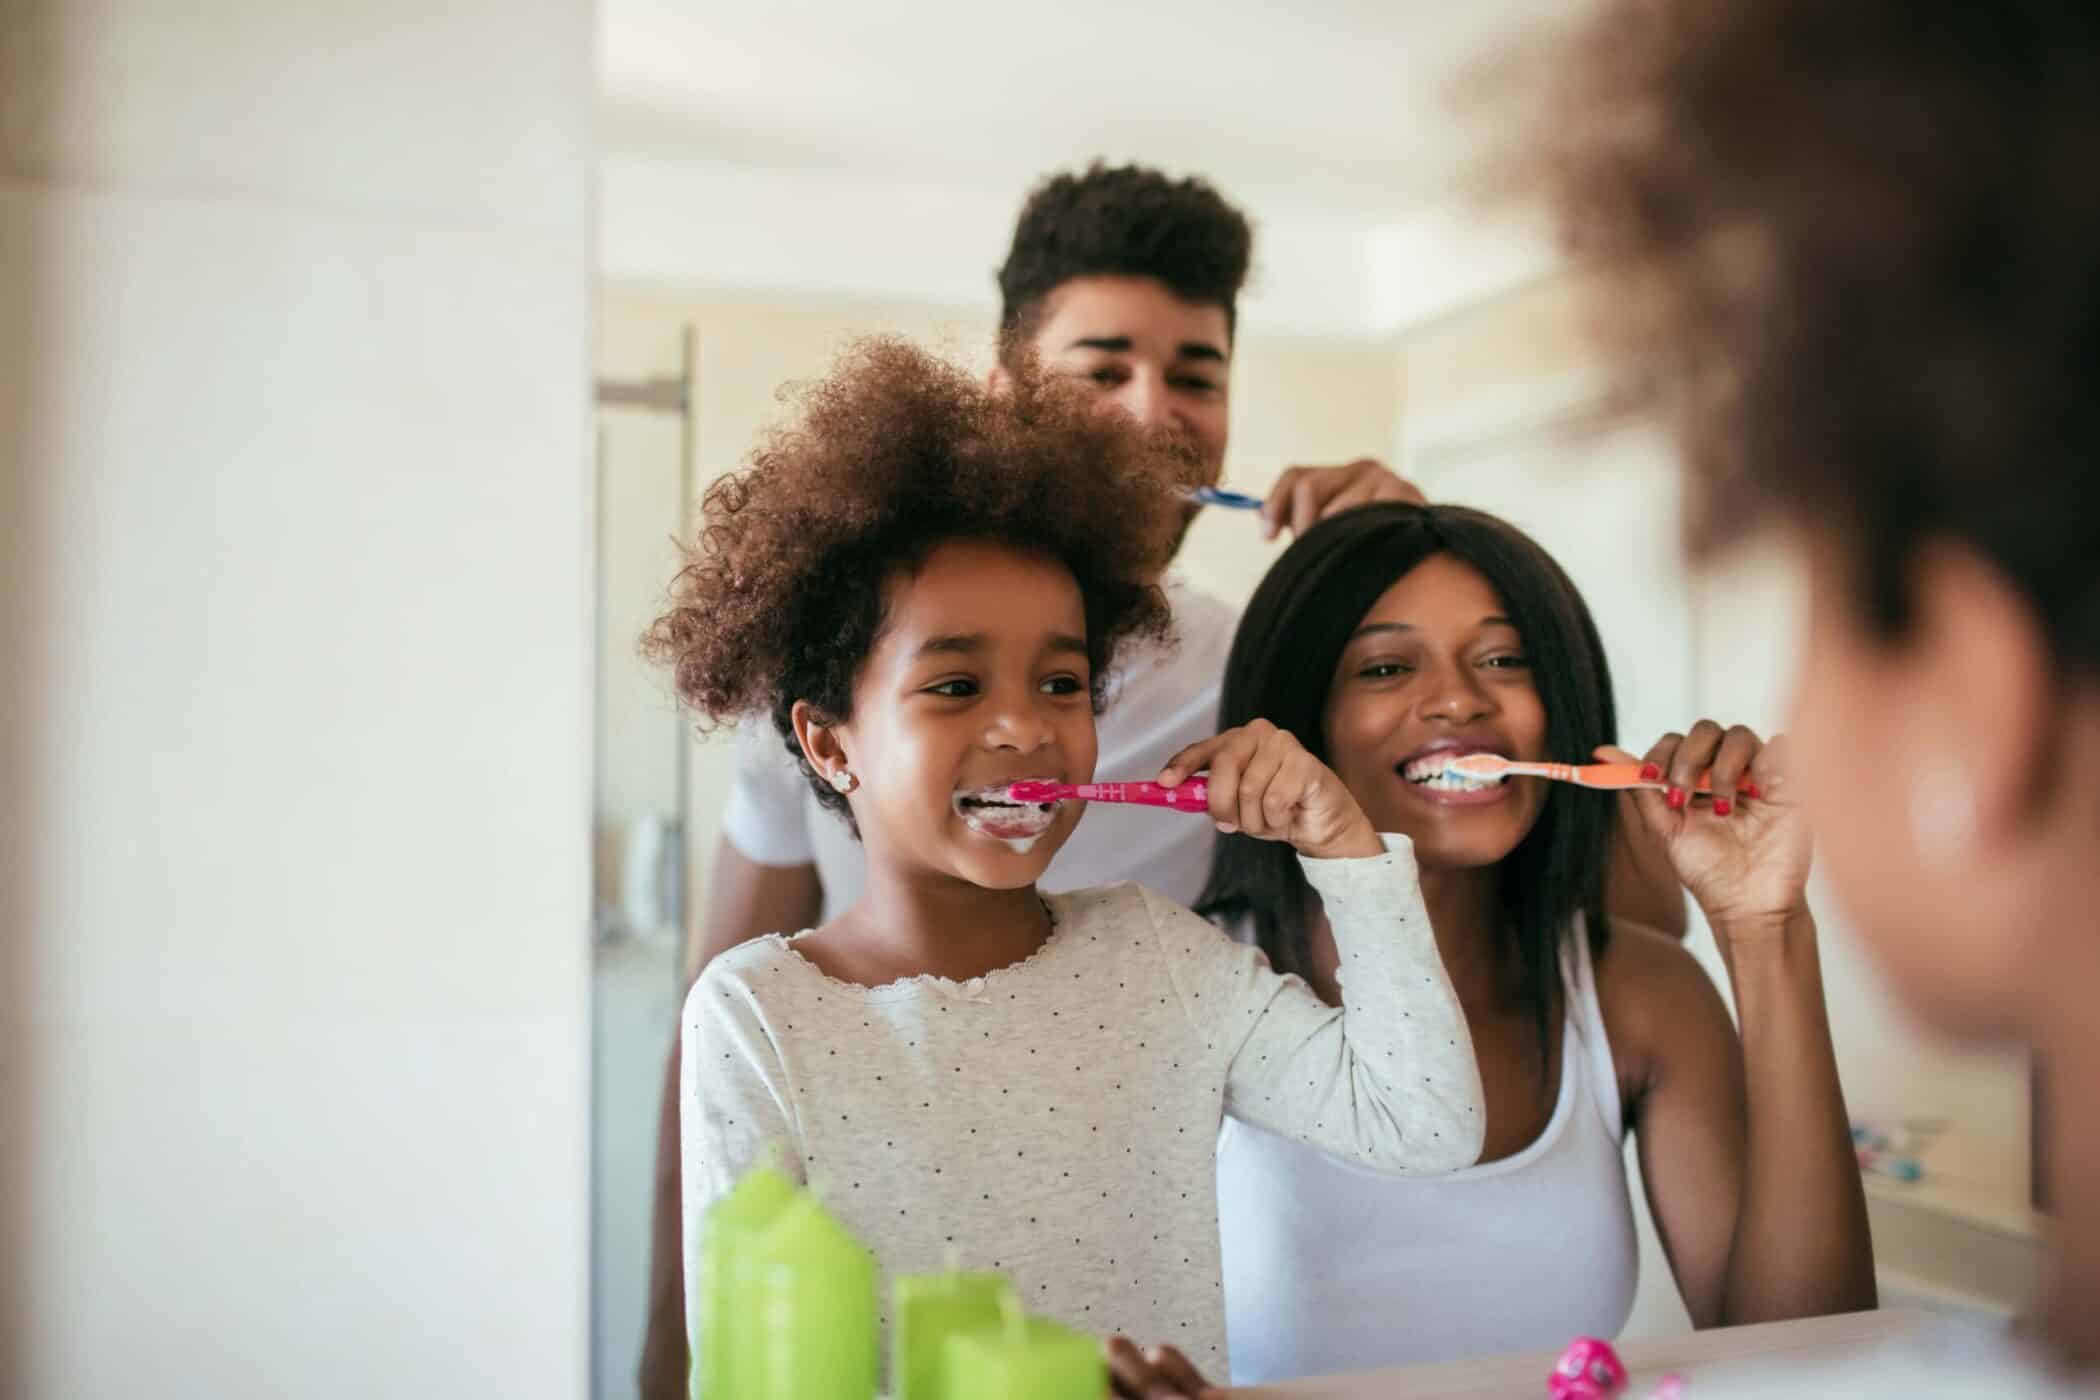 A Family Of Three Standing In A Bathroom, Brushing Their Teeth Together.